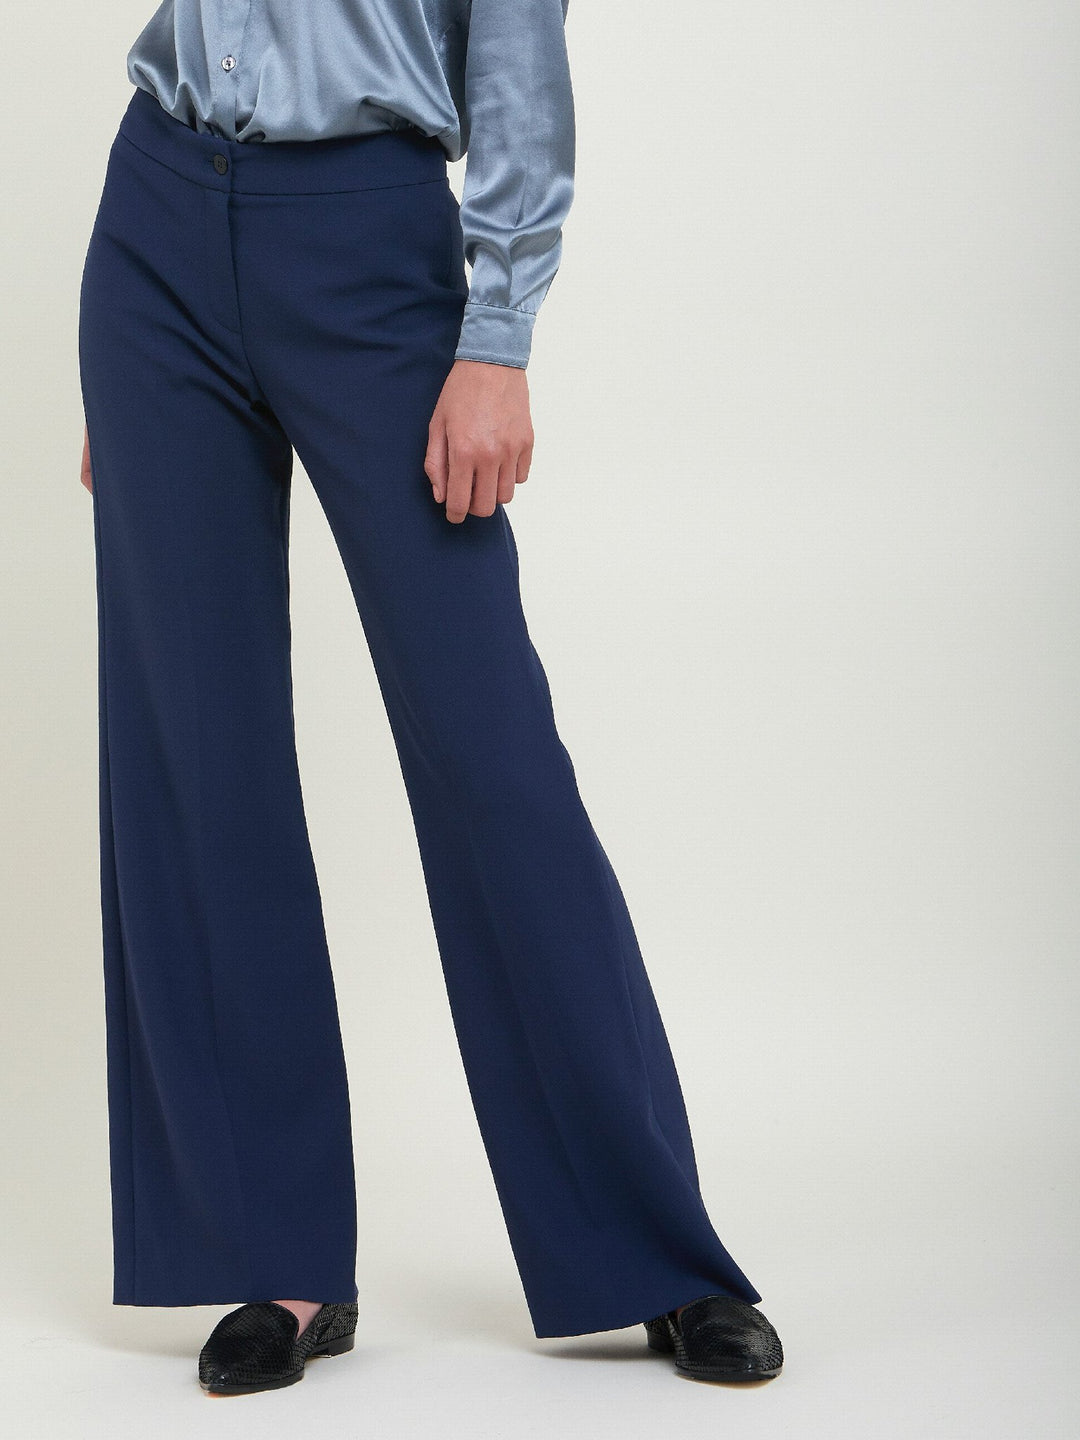 Kelly, a storm blue flare pant. Crafted in sustainable double crepe with a hint of stretch. Revisit the 70's for this season’s game-changing look. Flares are sophisticated, comfortable & leg-lengthening. Guaranteed to flatter the form & never far from fashion’s front line.